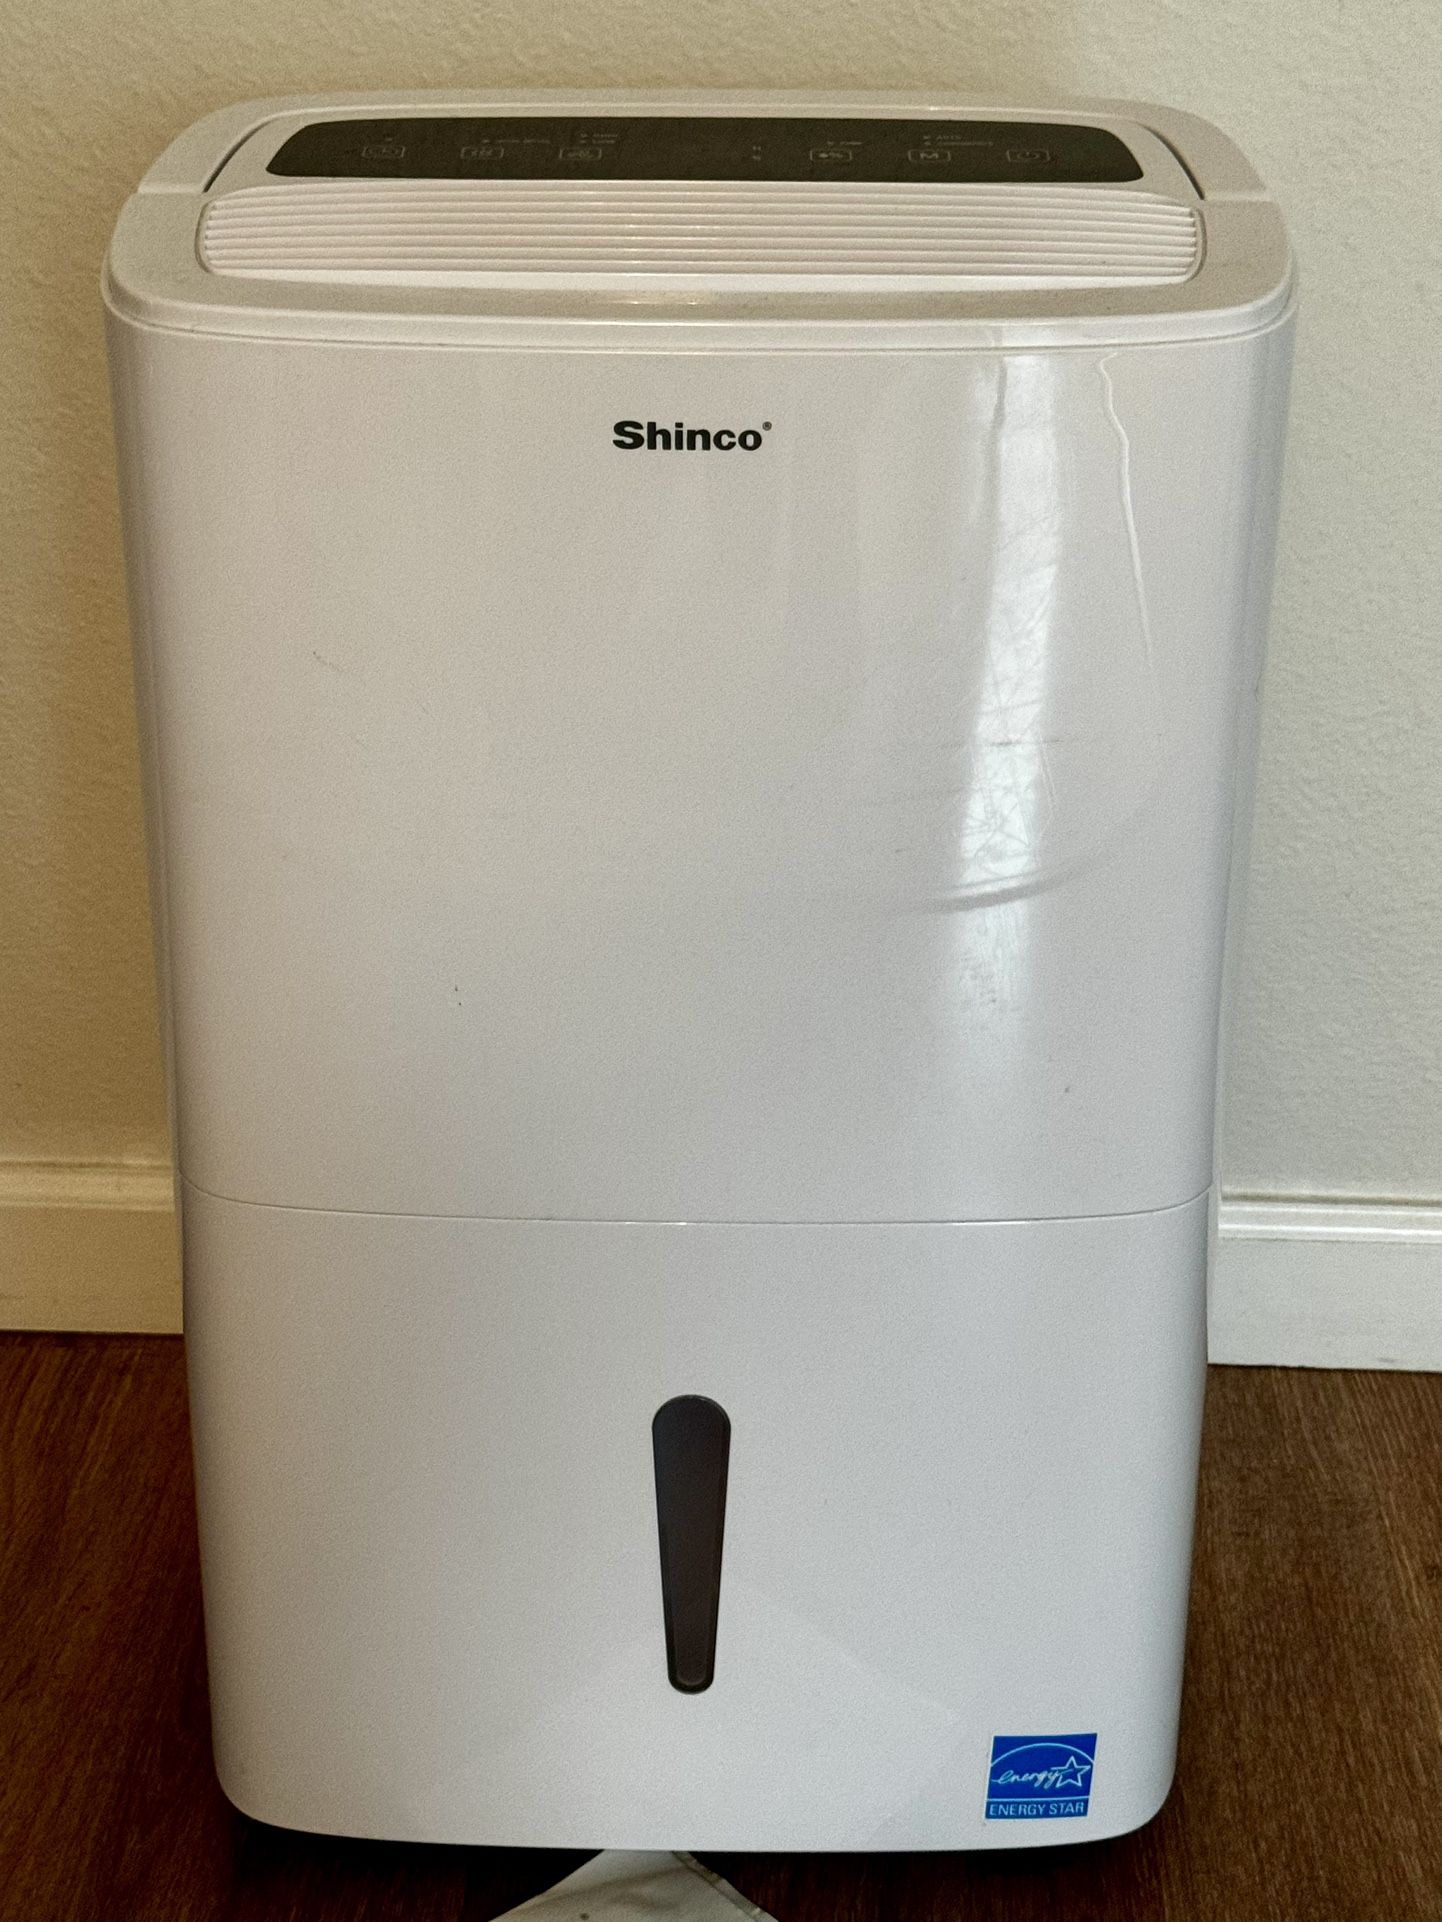 Shinco 150 Pints Energy Star Dehumidifier with Pump - Room up to 7,000 Sq.Ft